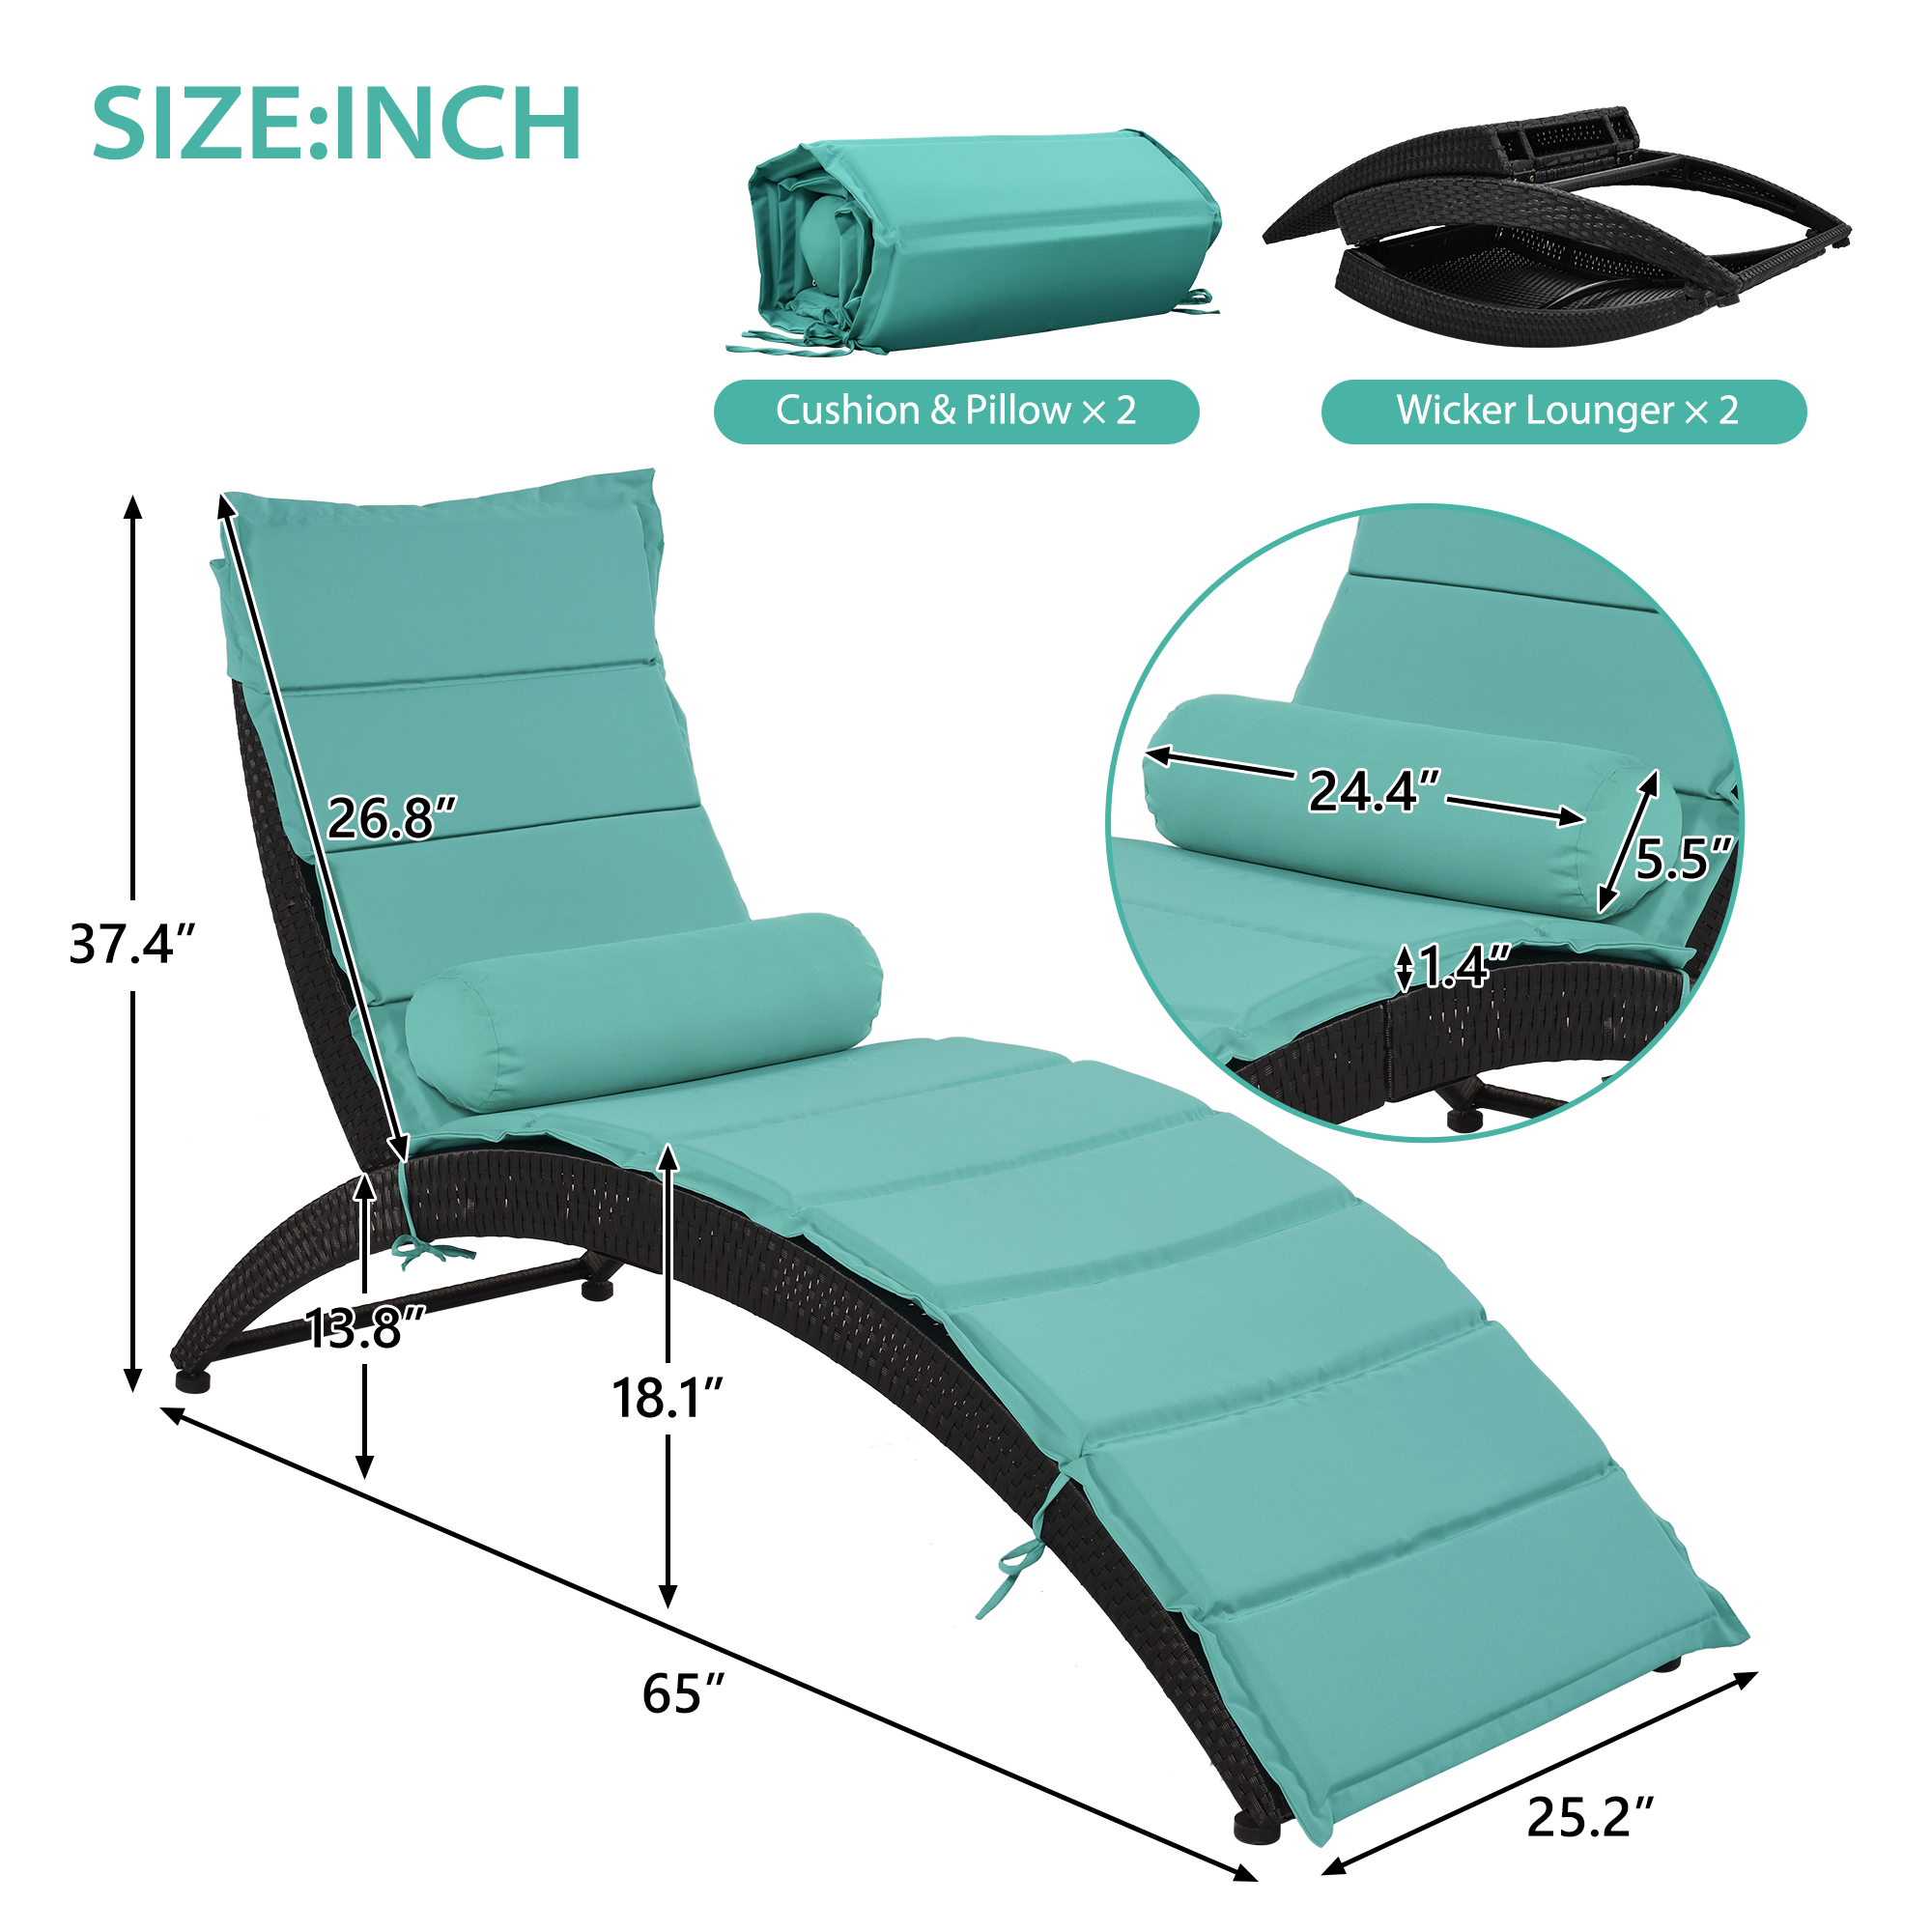 Chaise Lounge Chairs for Outside, 2 Pieces PE Wicker Foldable Reclining Chairs, Patio Sun Lounger with Removable Cushions, Rattan Chaise Chair for Poolside, Garden, Backyard, Greenish-blue, D8595 - image 5 of 10